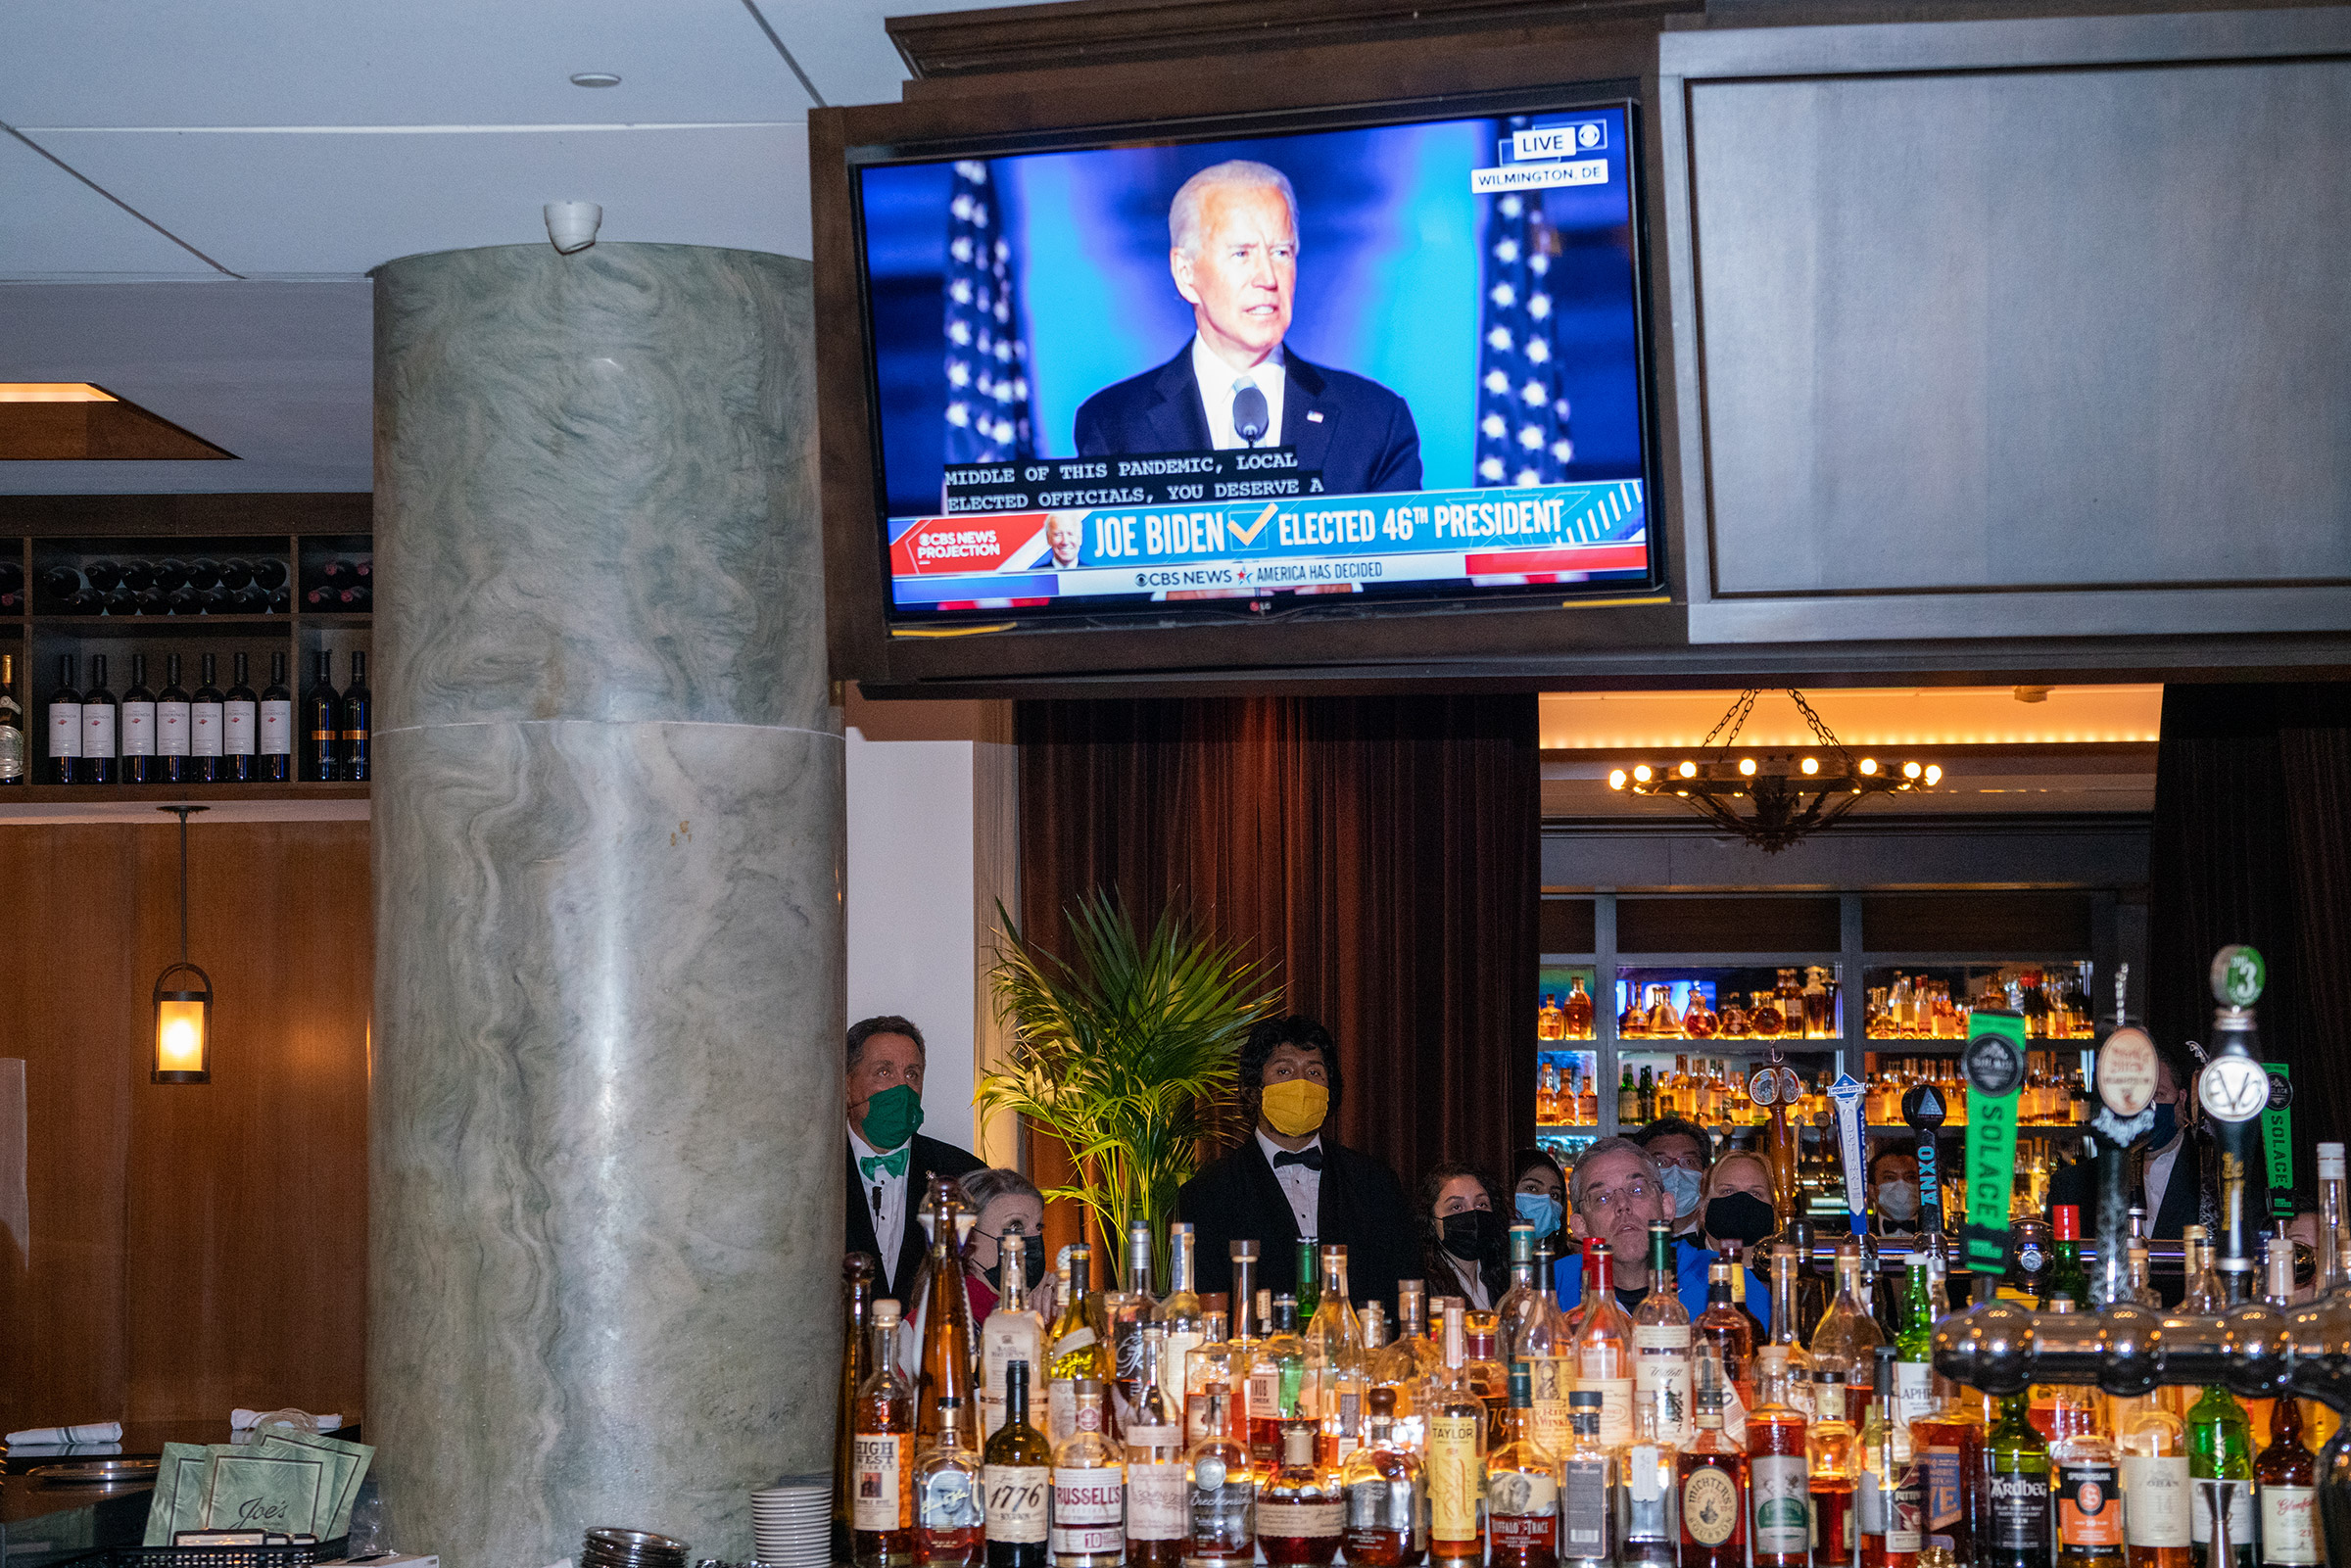 Joe Biden's first speech as President-elect is broadcast at a restaurant in Washington, D.C., on Nov. 7. (Peter van Agtmael—Magnum Photos for TIME)